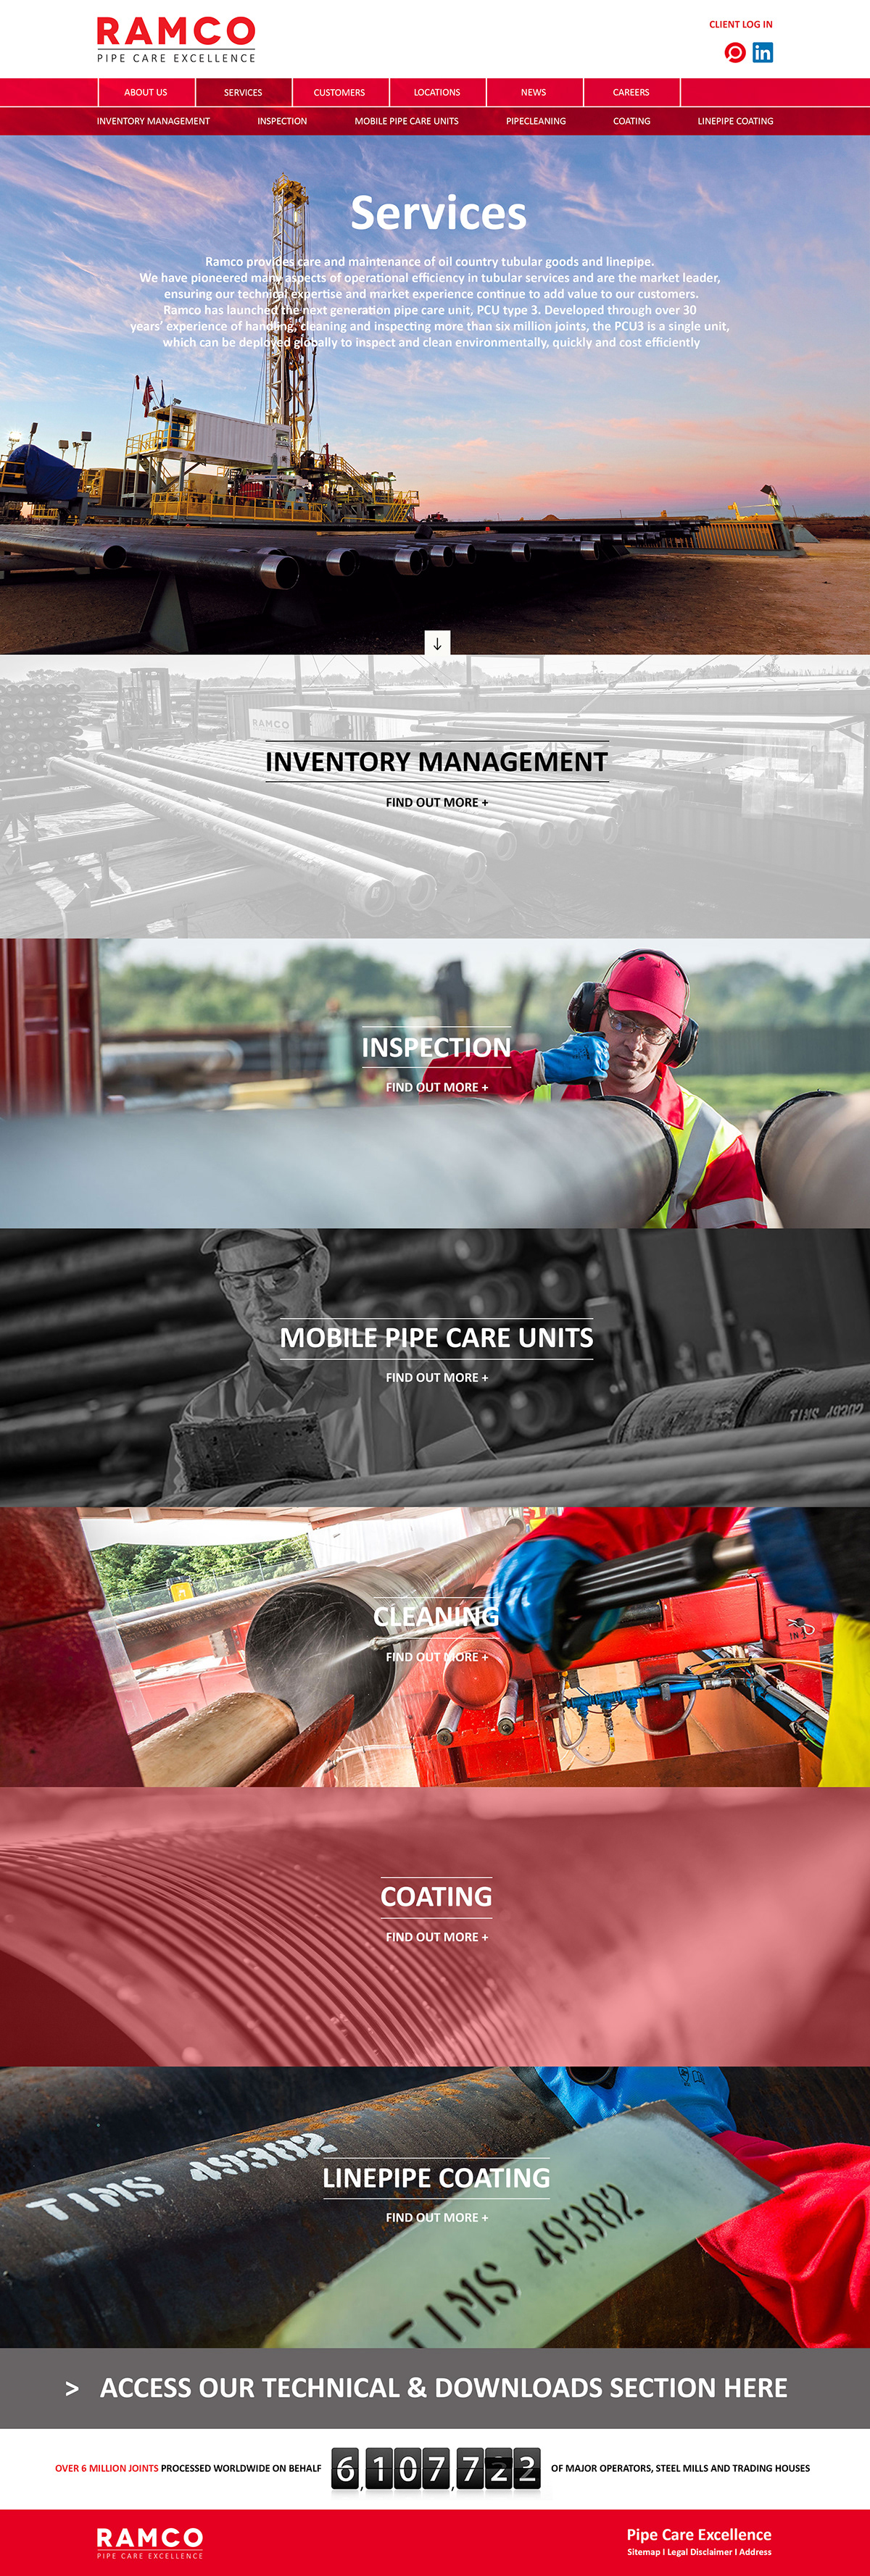 Aberdeen energy offshore OIL AND GAS PIPE CARE Ramco Website Design